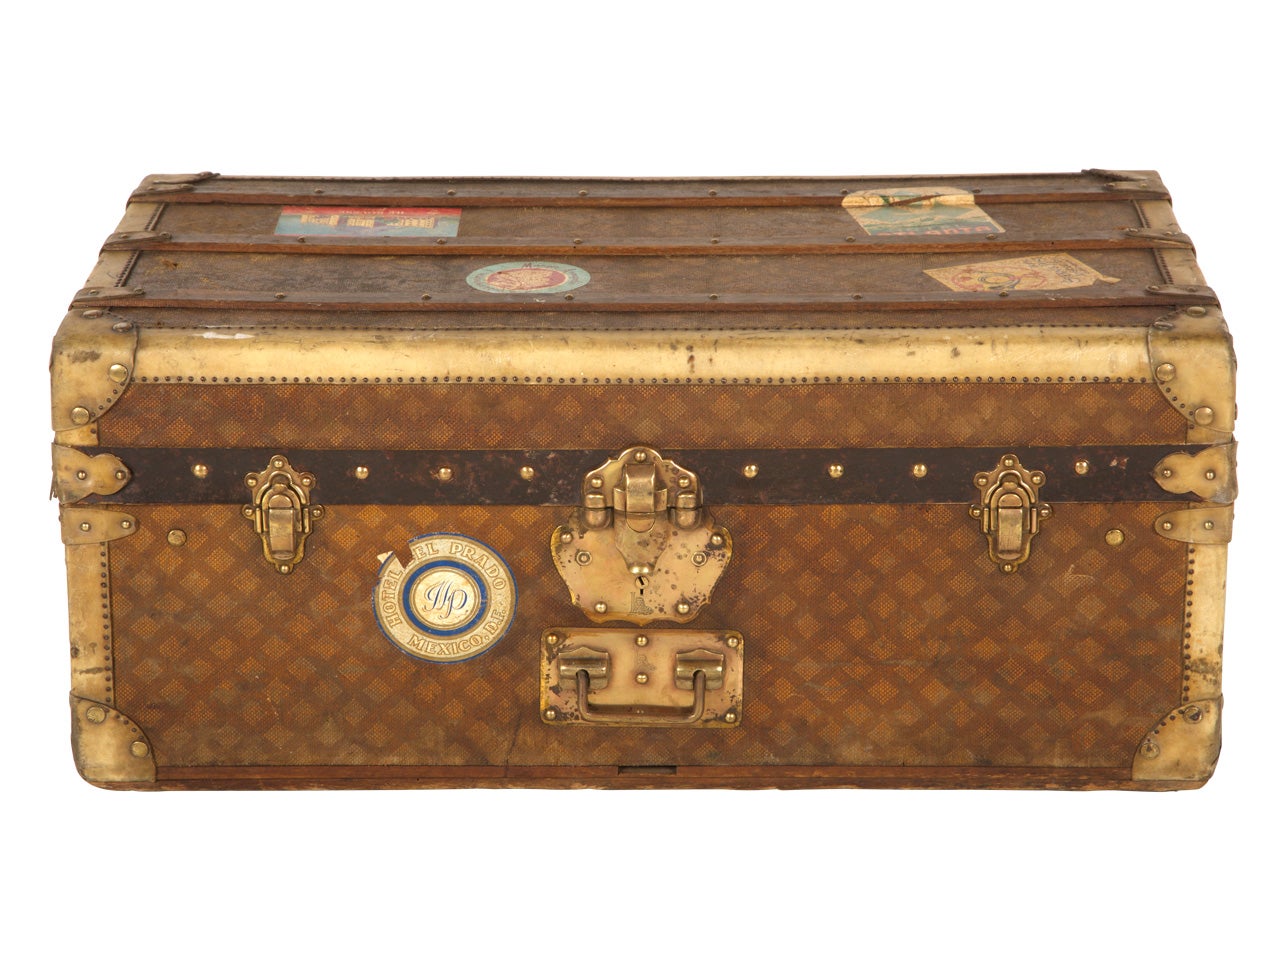 Antique French Trunk